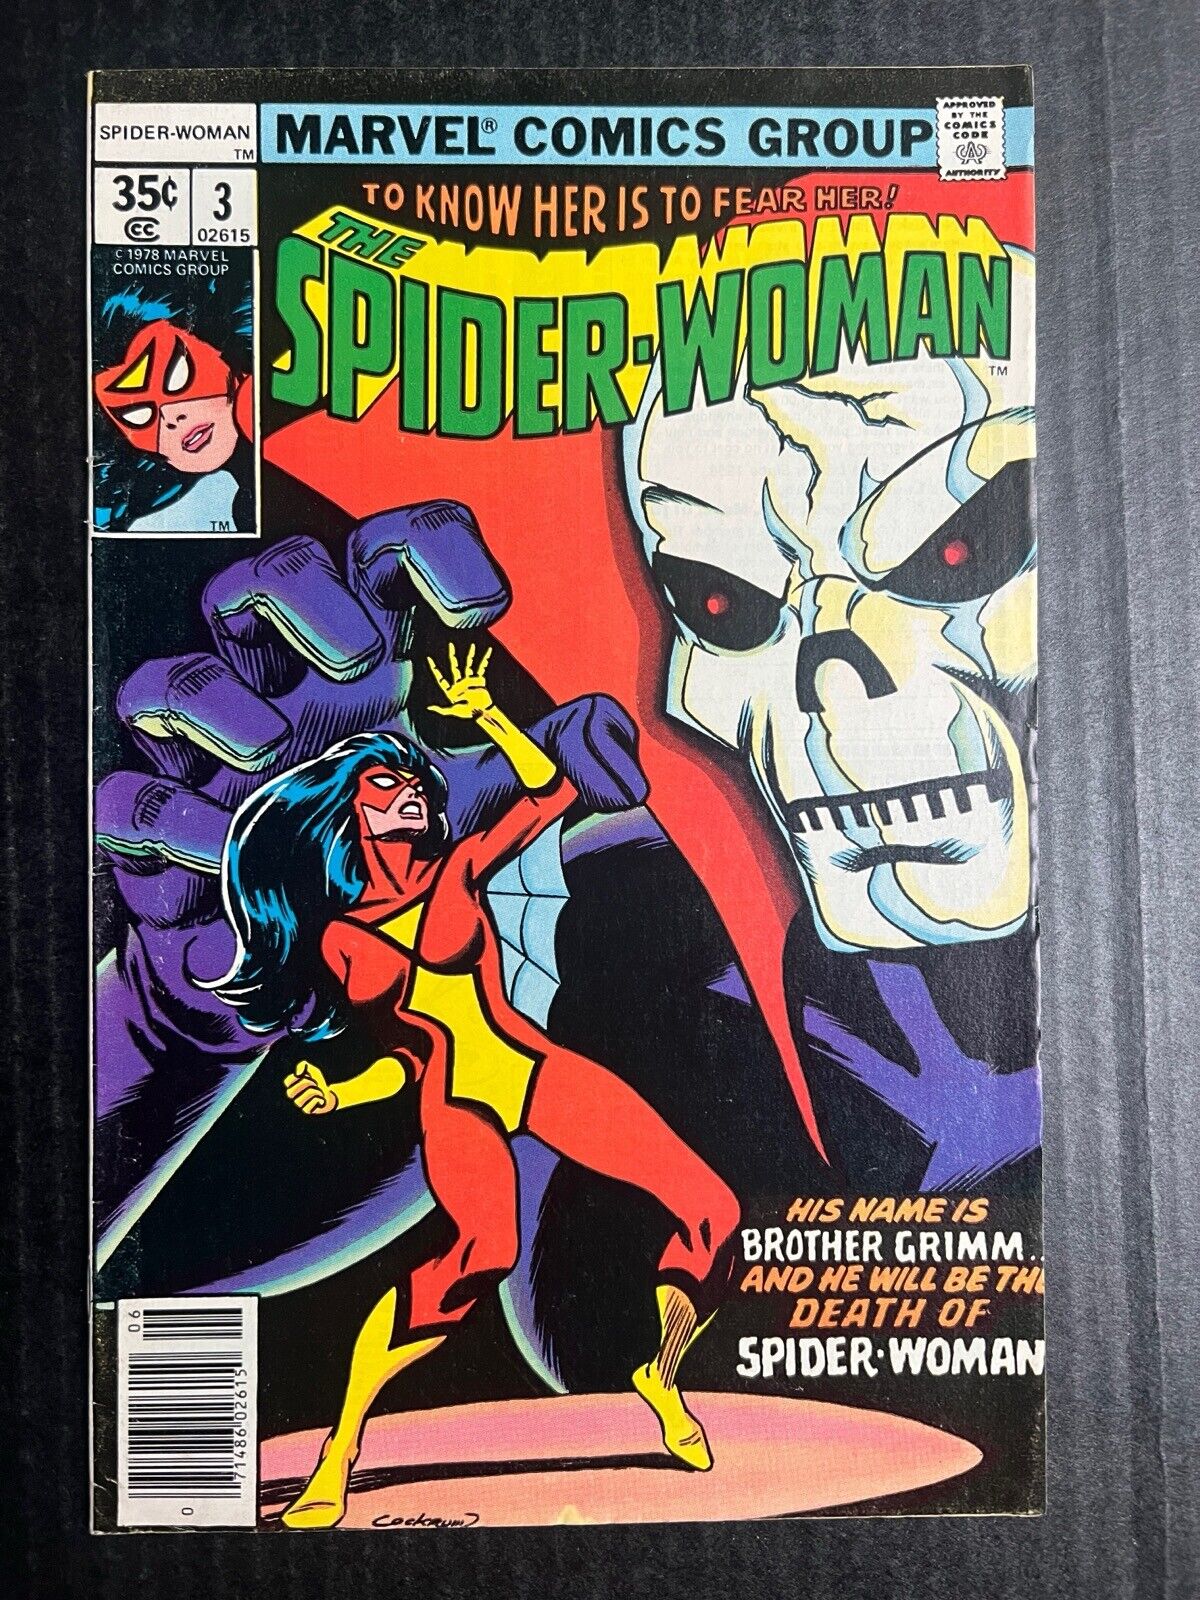 SPIDER-WOMAN #3 June 1978 First Team Appearance of Brothers Grimm